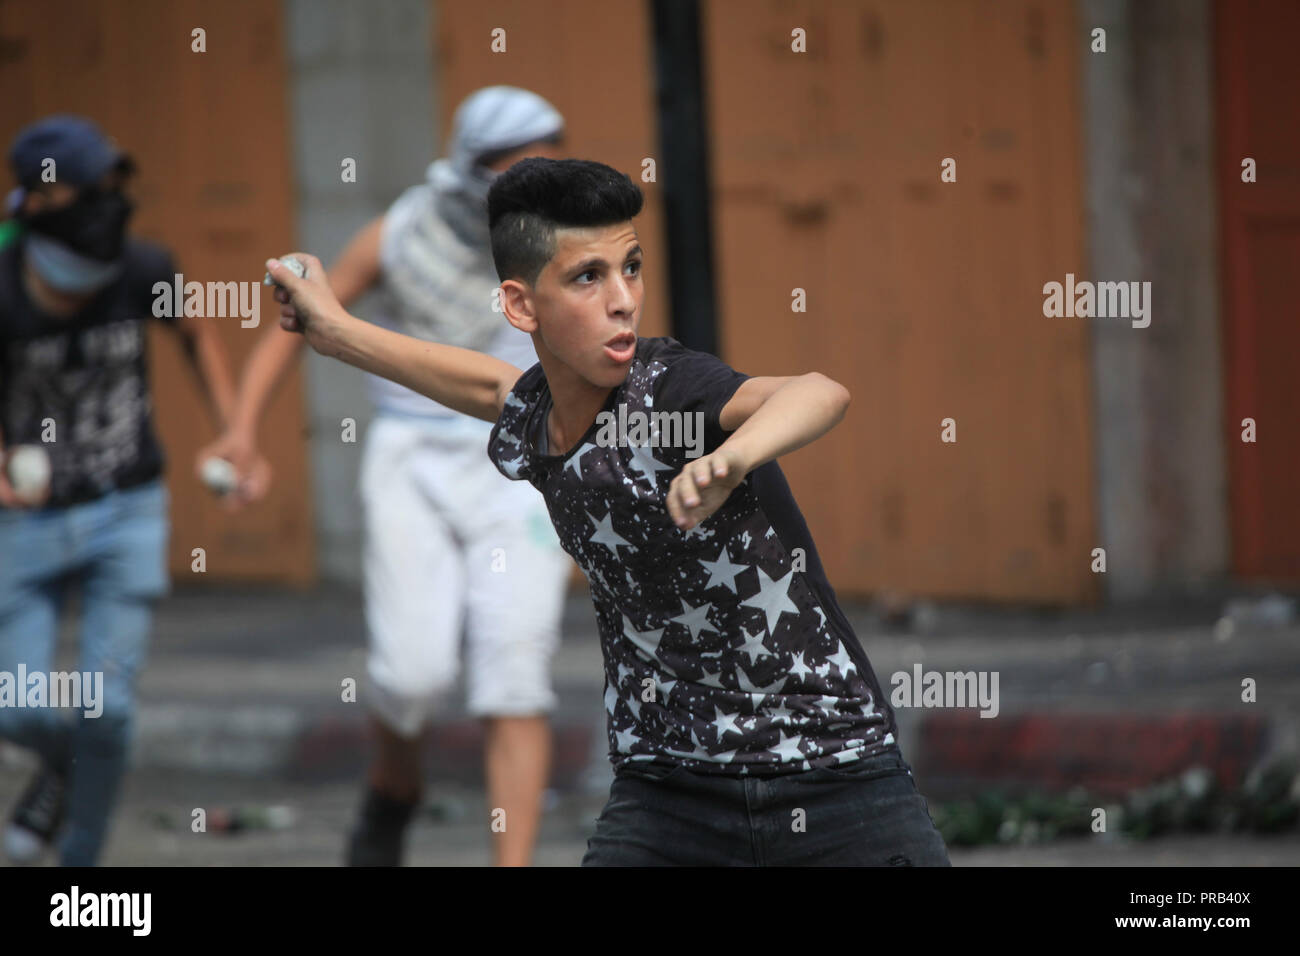 Hebron, West Bank City of Hebron. 1st Oct, 2018. A Palestinian boy hurls stones at Israeli soldiers during clashes after a protest against the recently passed Jewish nation state law, in the West Bank City of Hebron, on Oct. 1, 2018. Credit: Mamoun Wazwaz/Xinhua/Alamy Live News Stock Photo